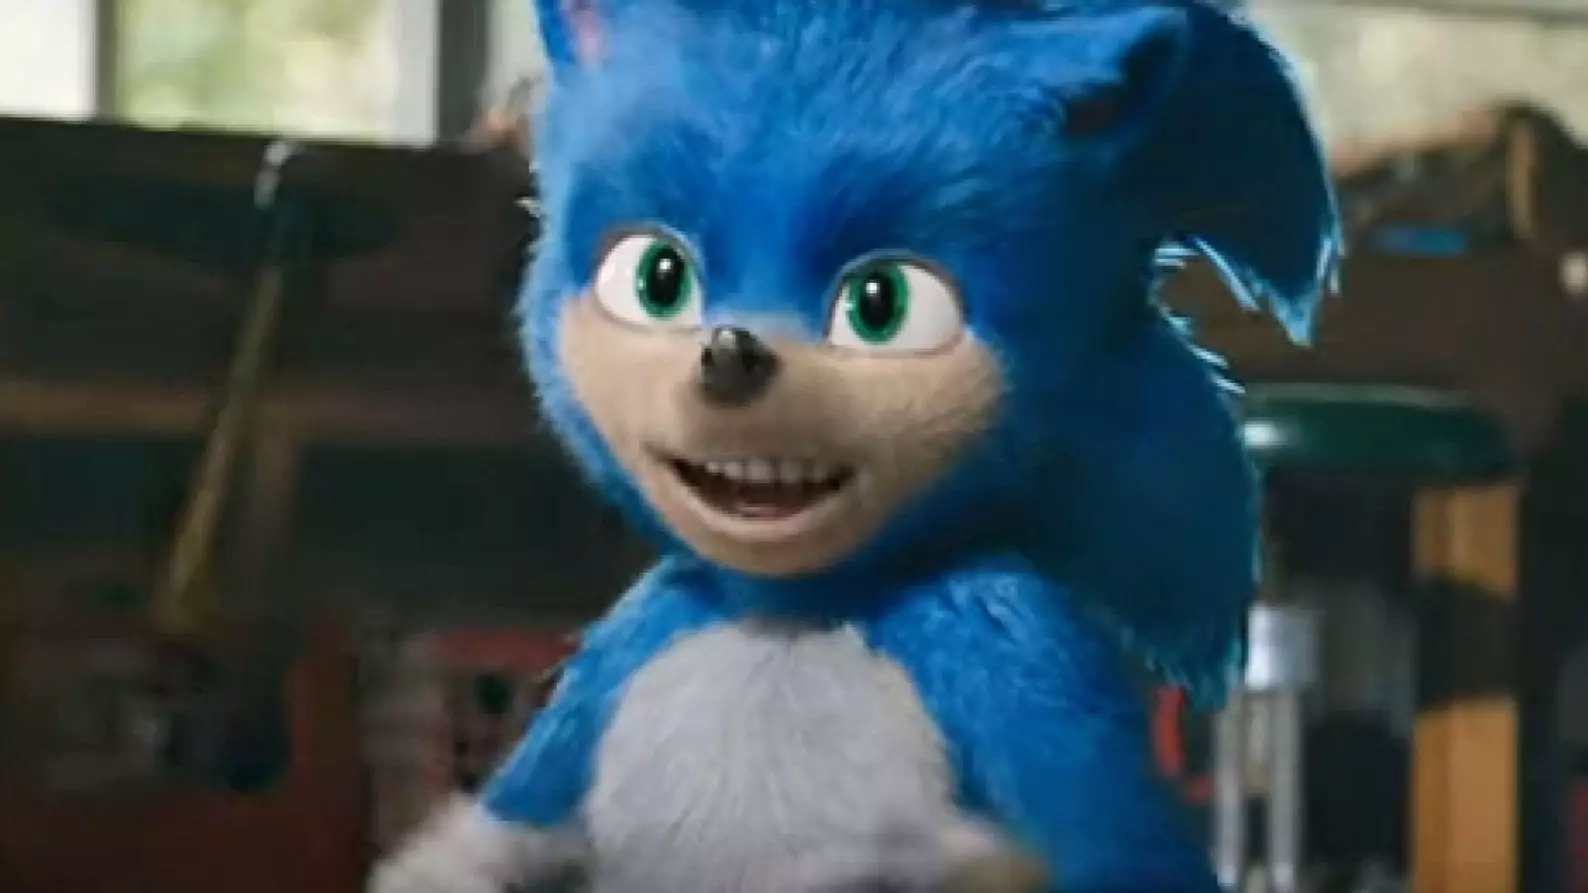 Producers Change Sonic The Hedgehog For Upcoming Film After Being Lambasted For His Appearance